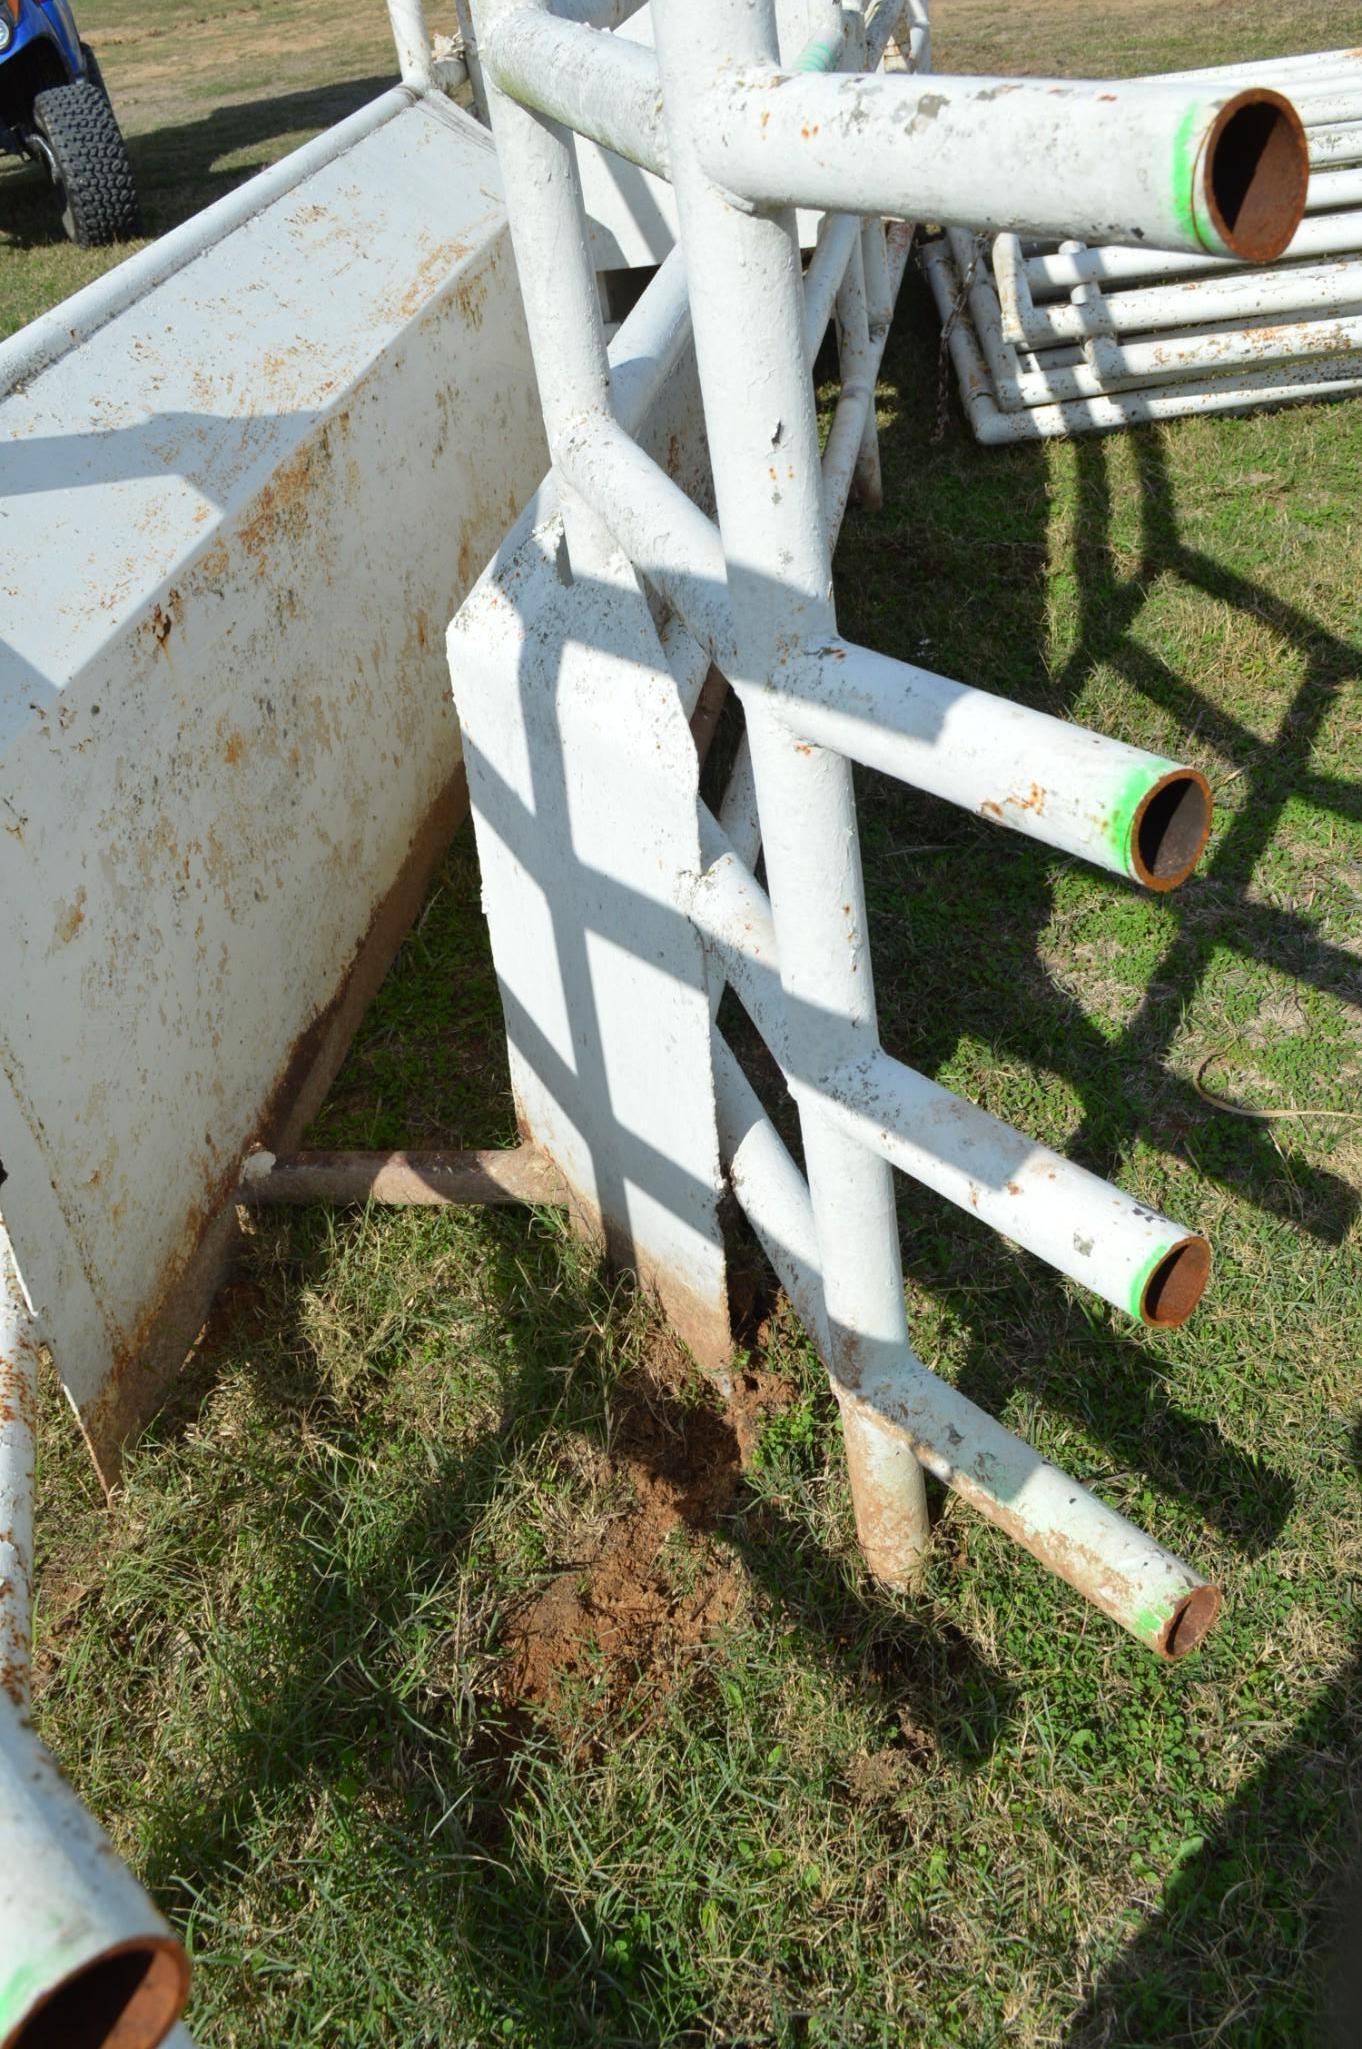 Back Pens for Roping Arena - Includes Calf Chute, Steer Chute, Boxes etc.